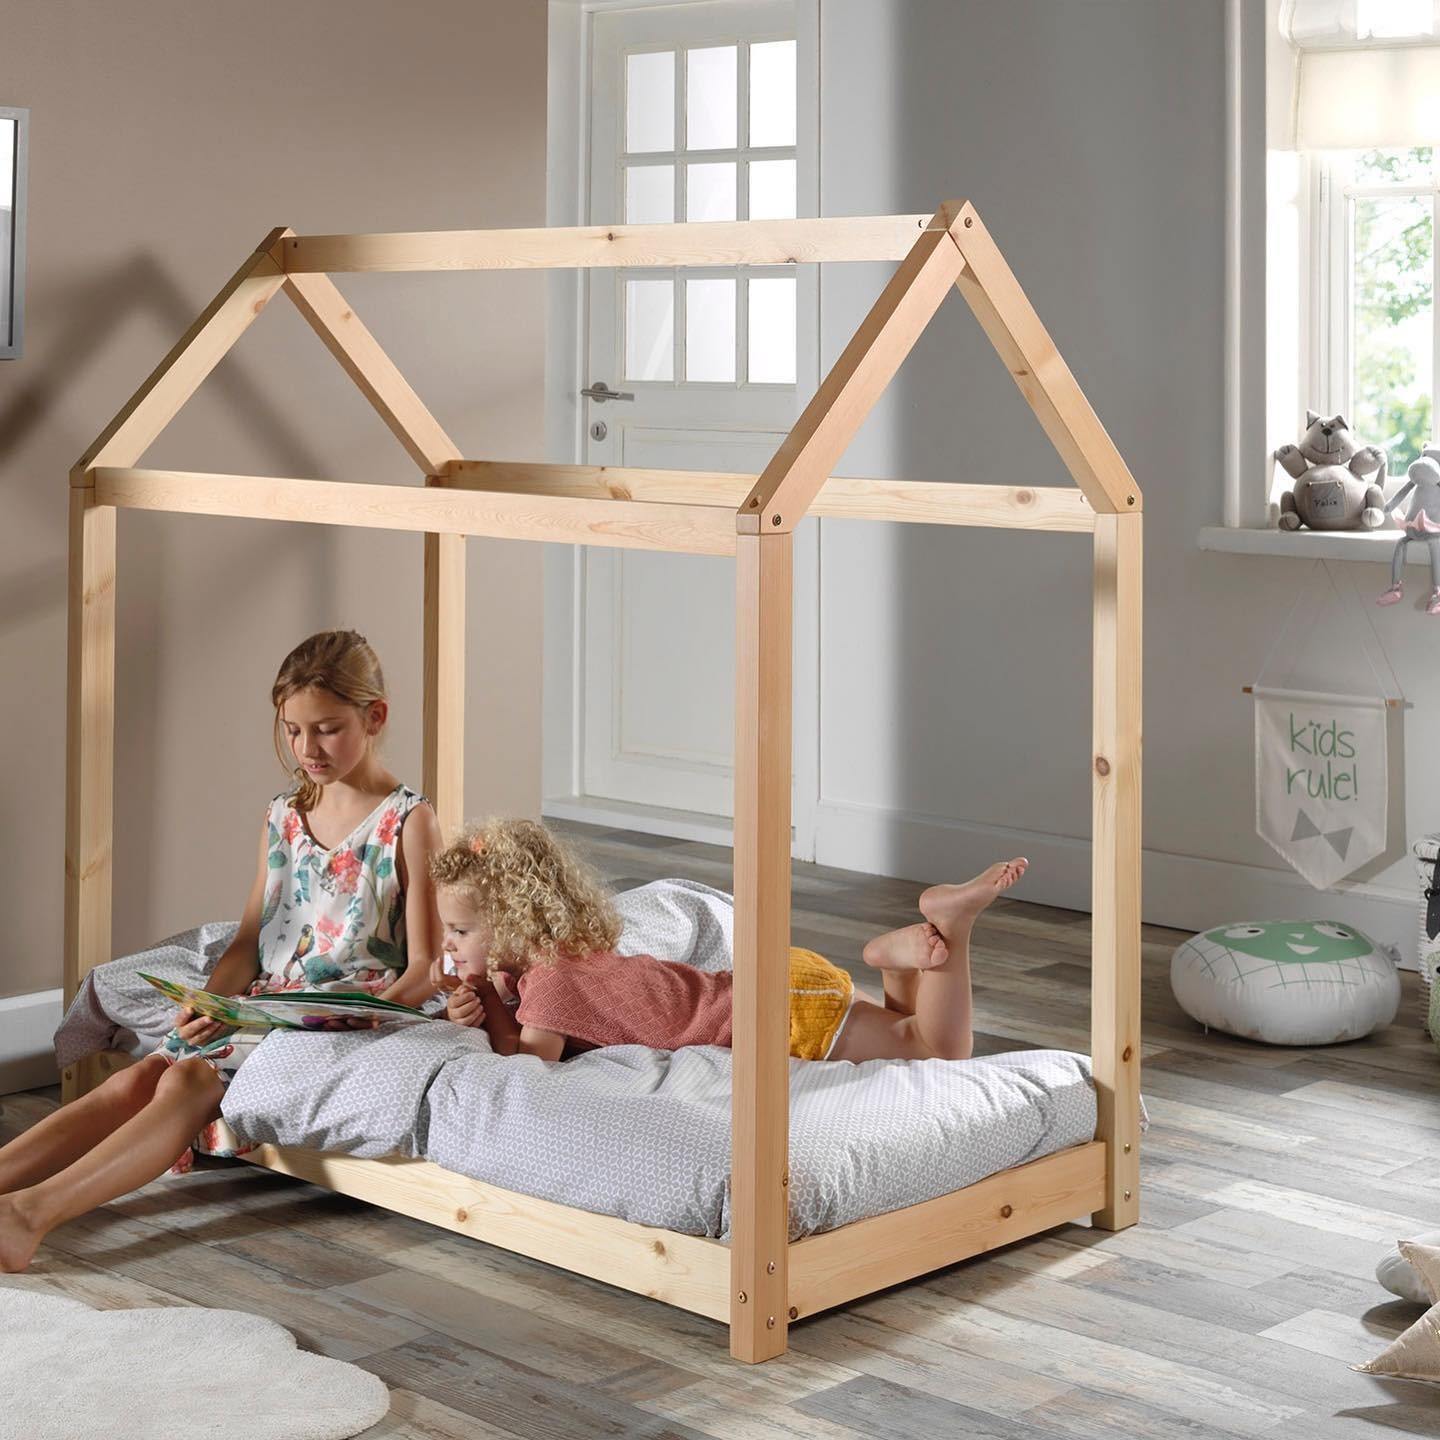 THE CABANE KIDS BED